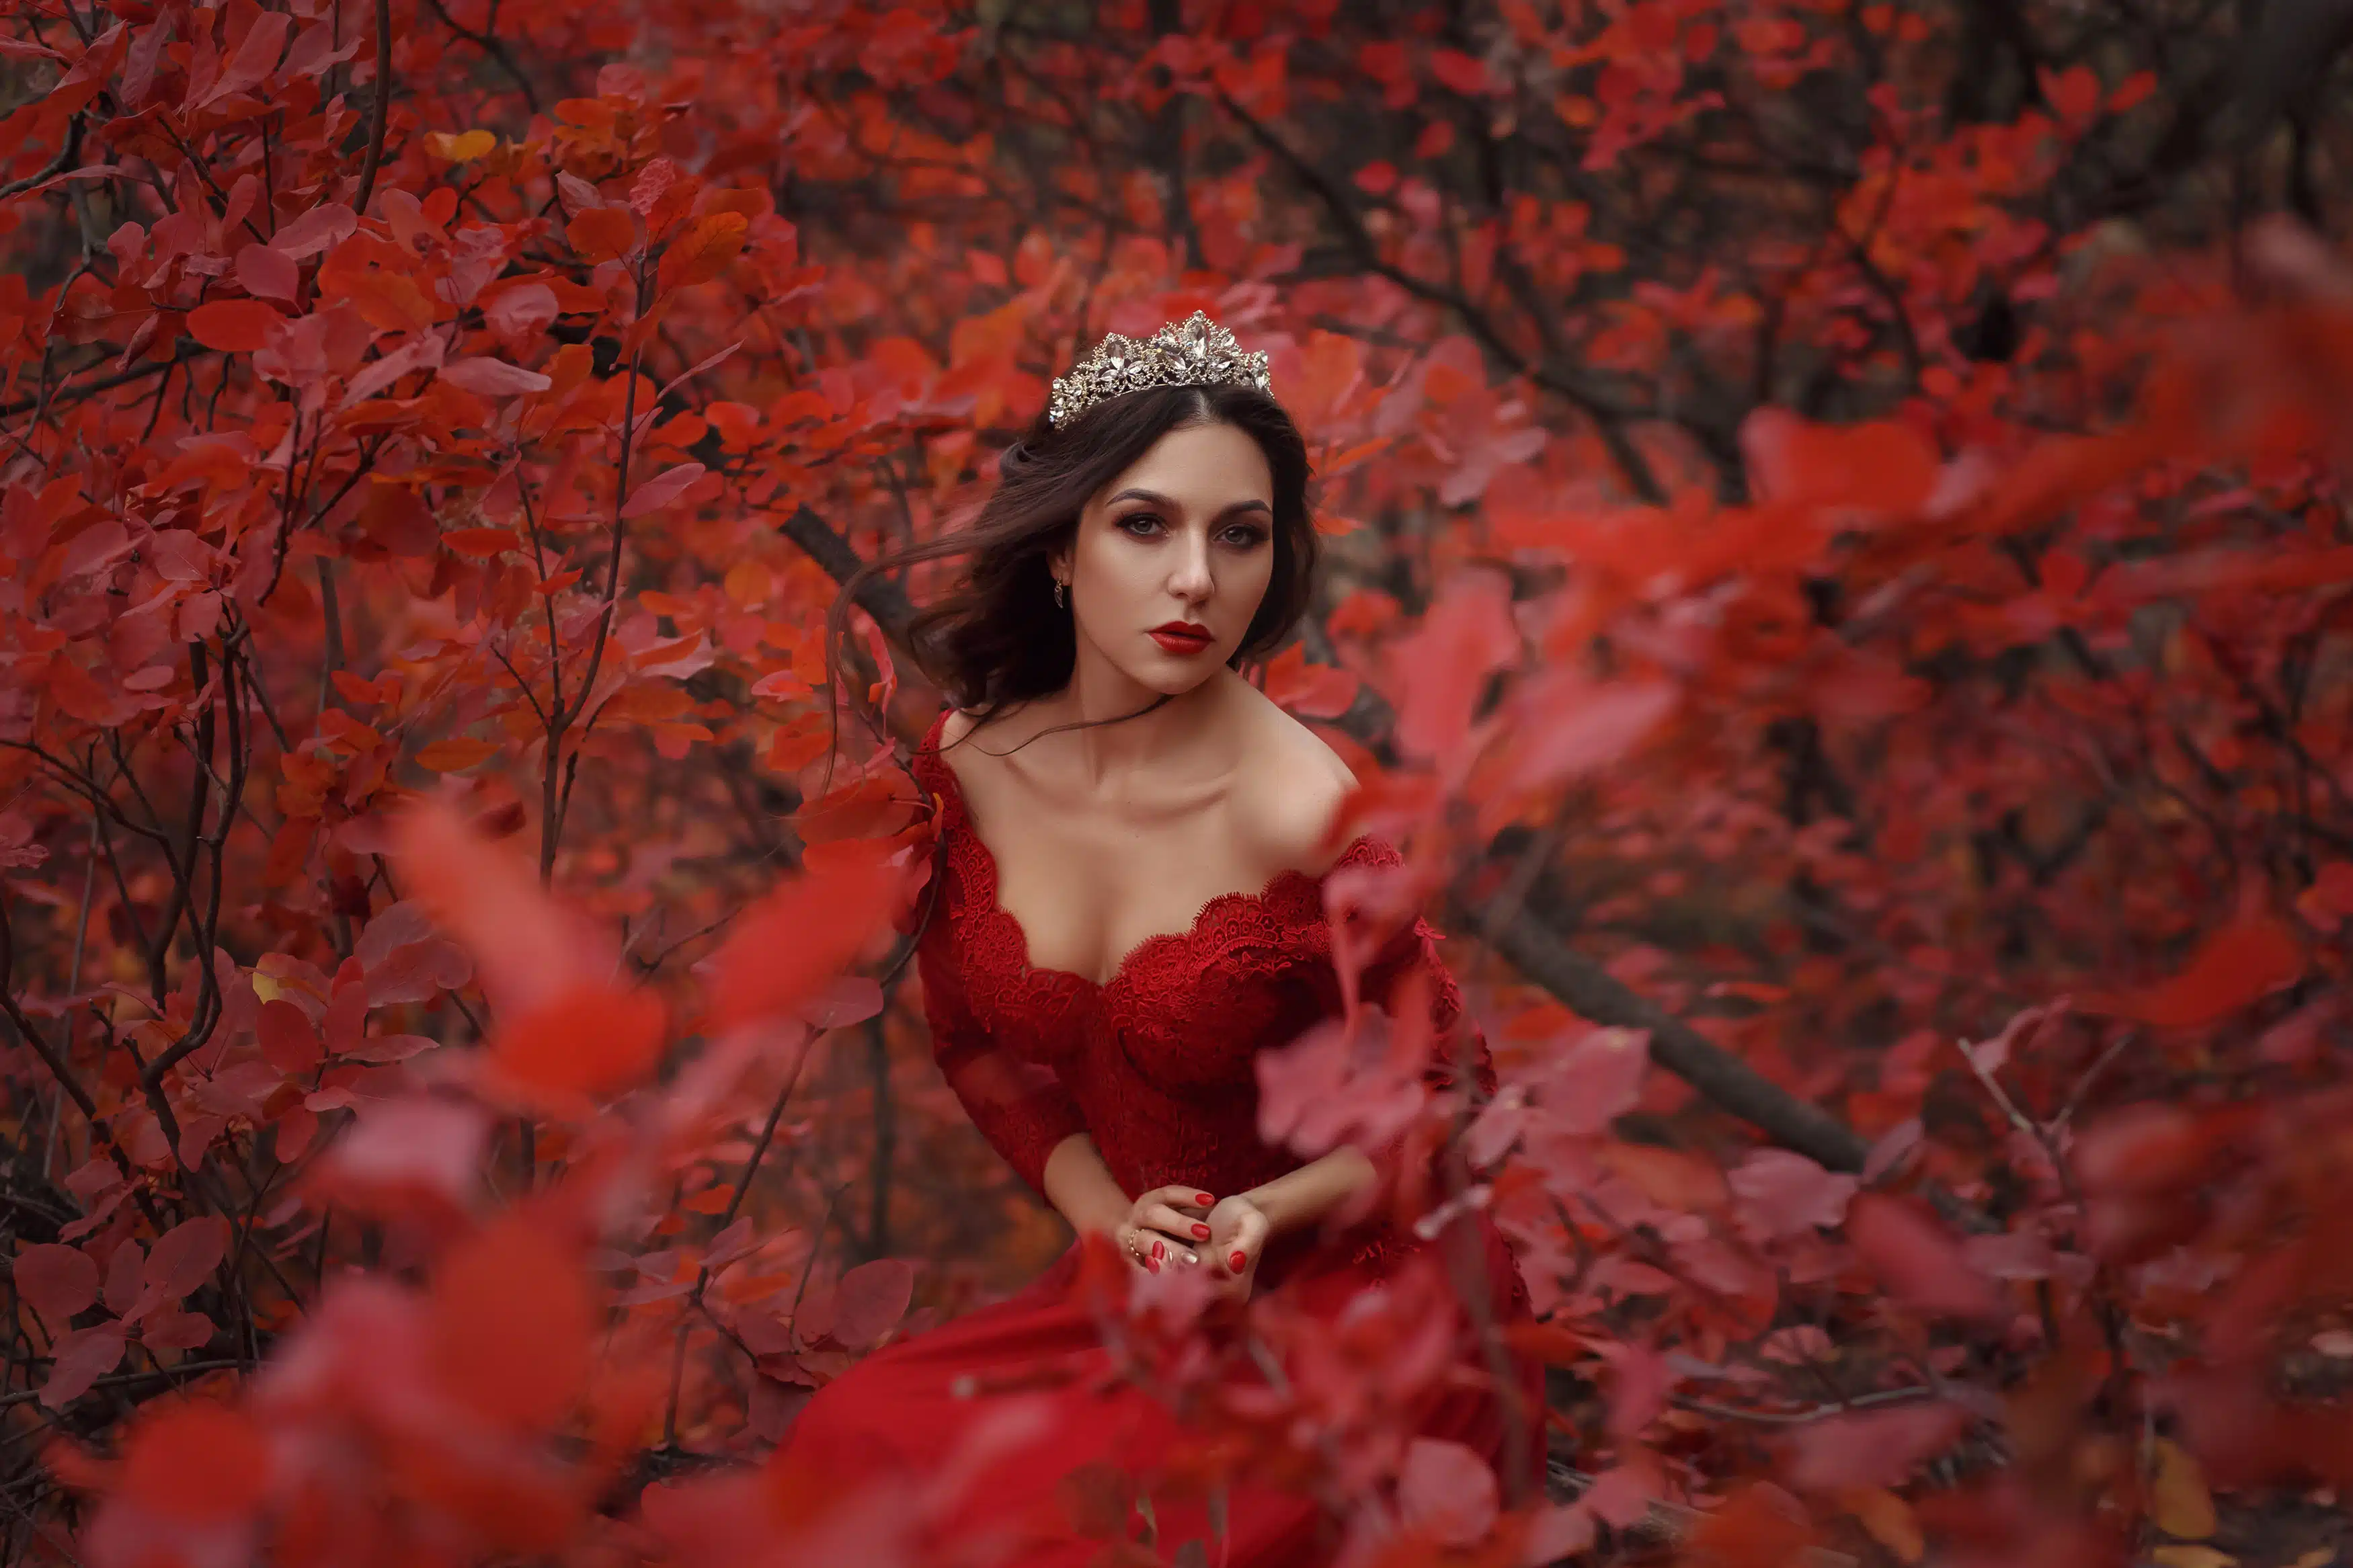 Incredible stunning girl in a red dress. The background is fantastic autumn.